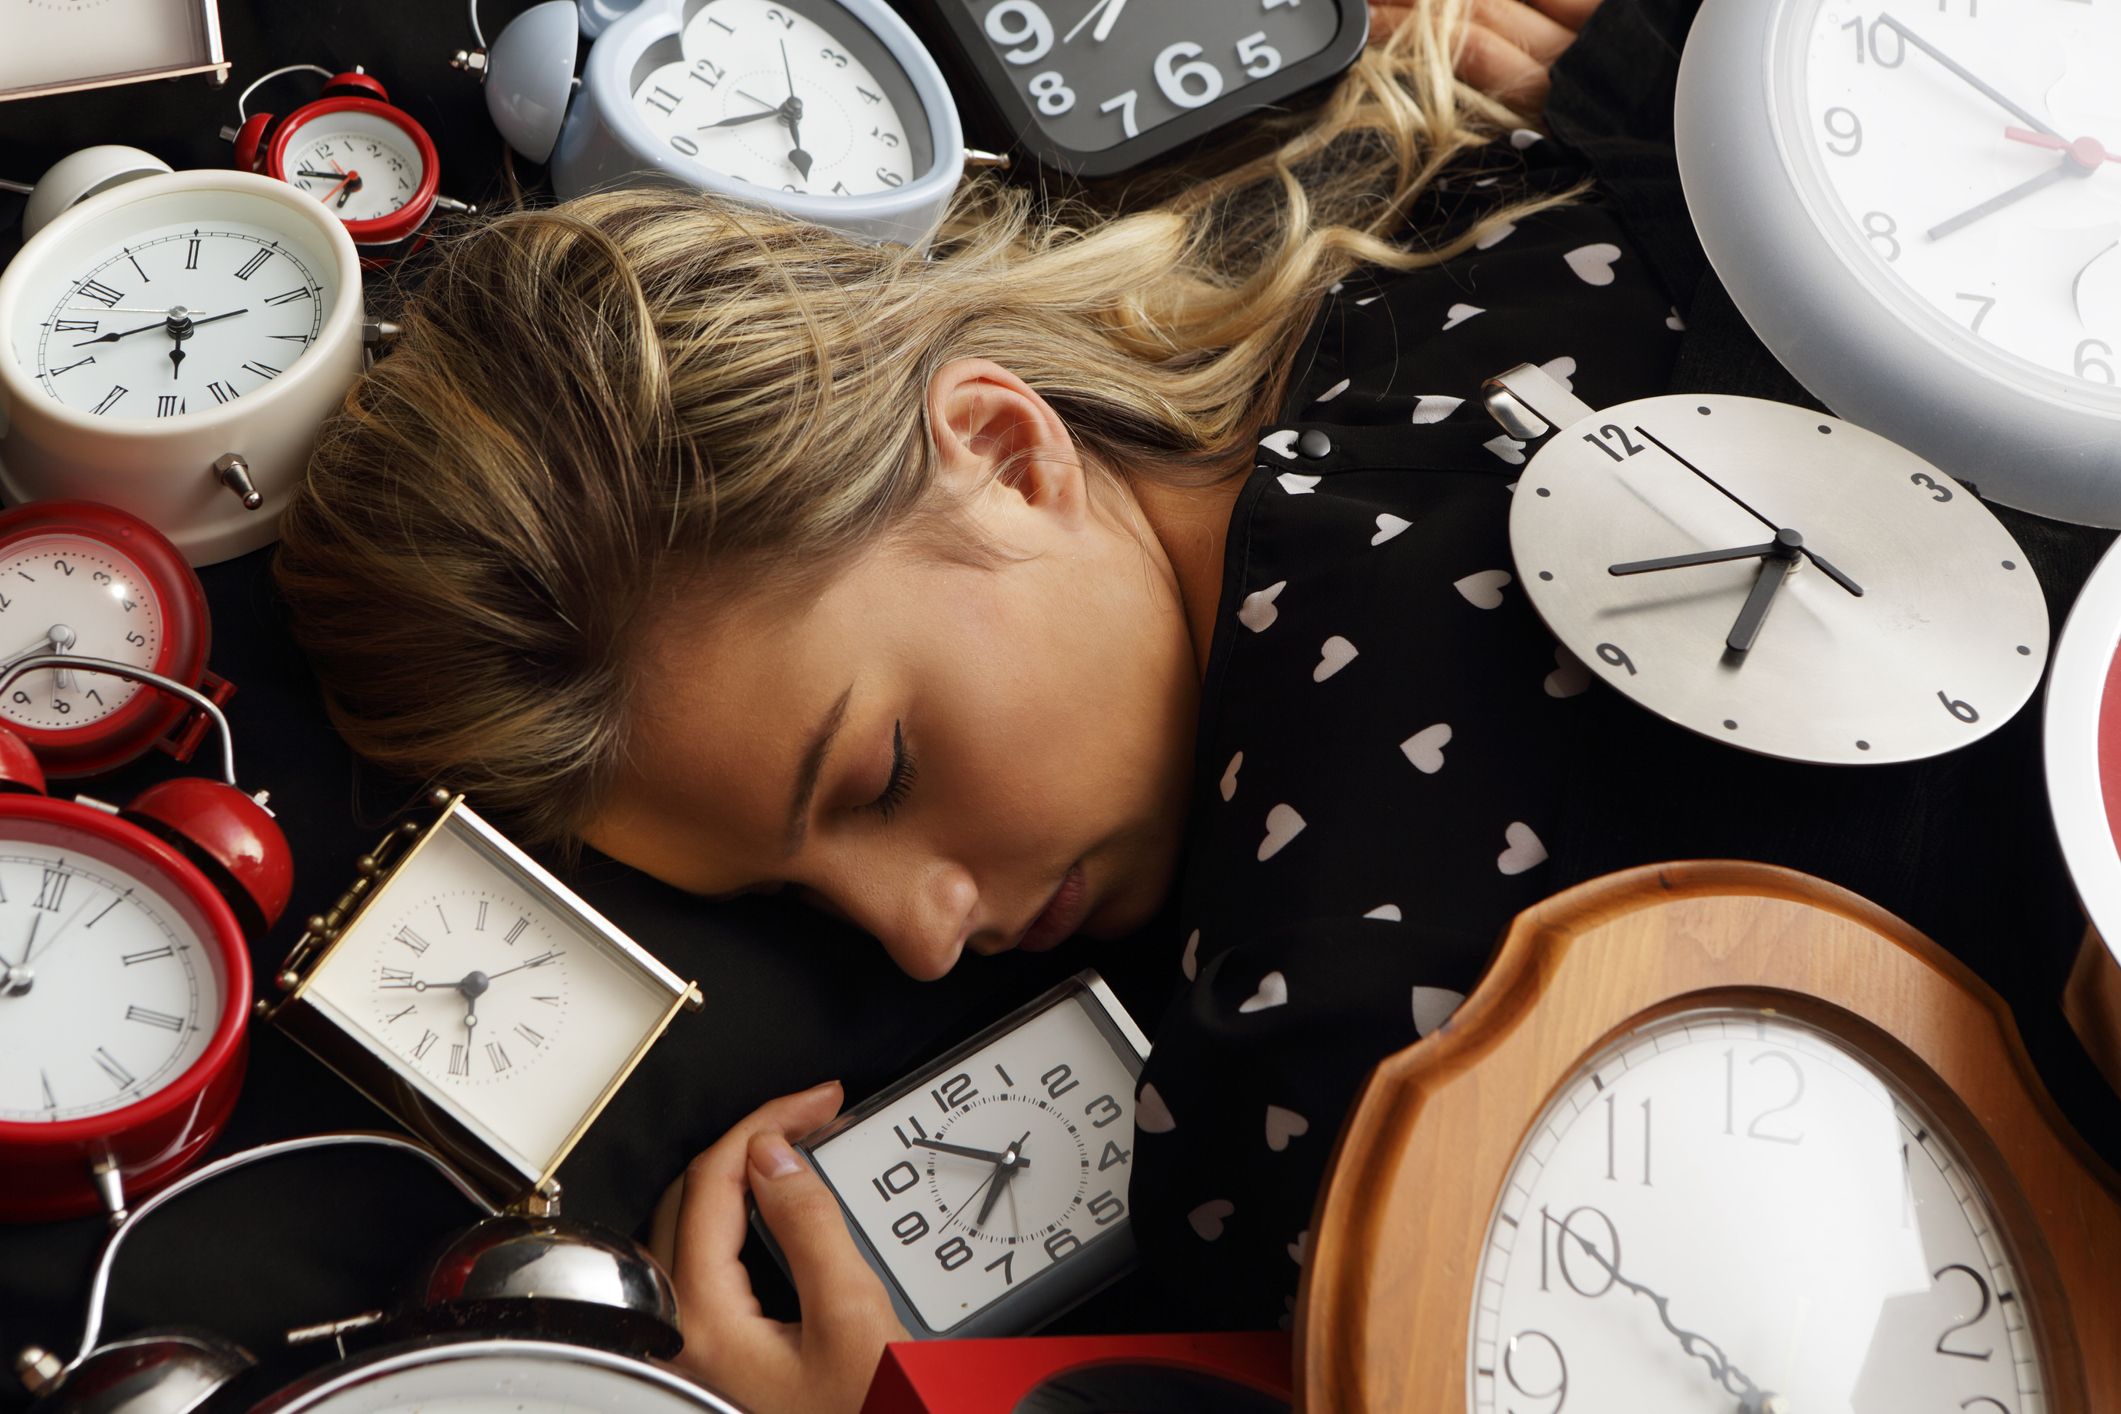 A woman sleeping with many clocks. | Source: Getty Images